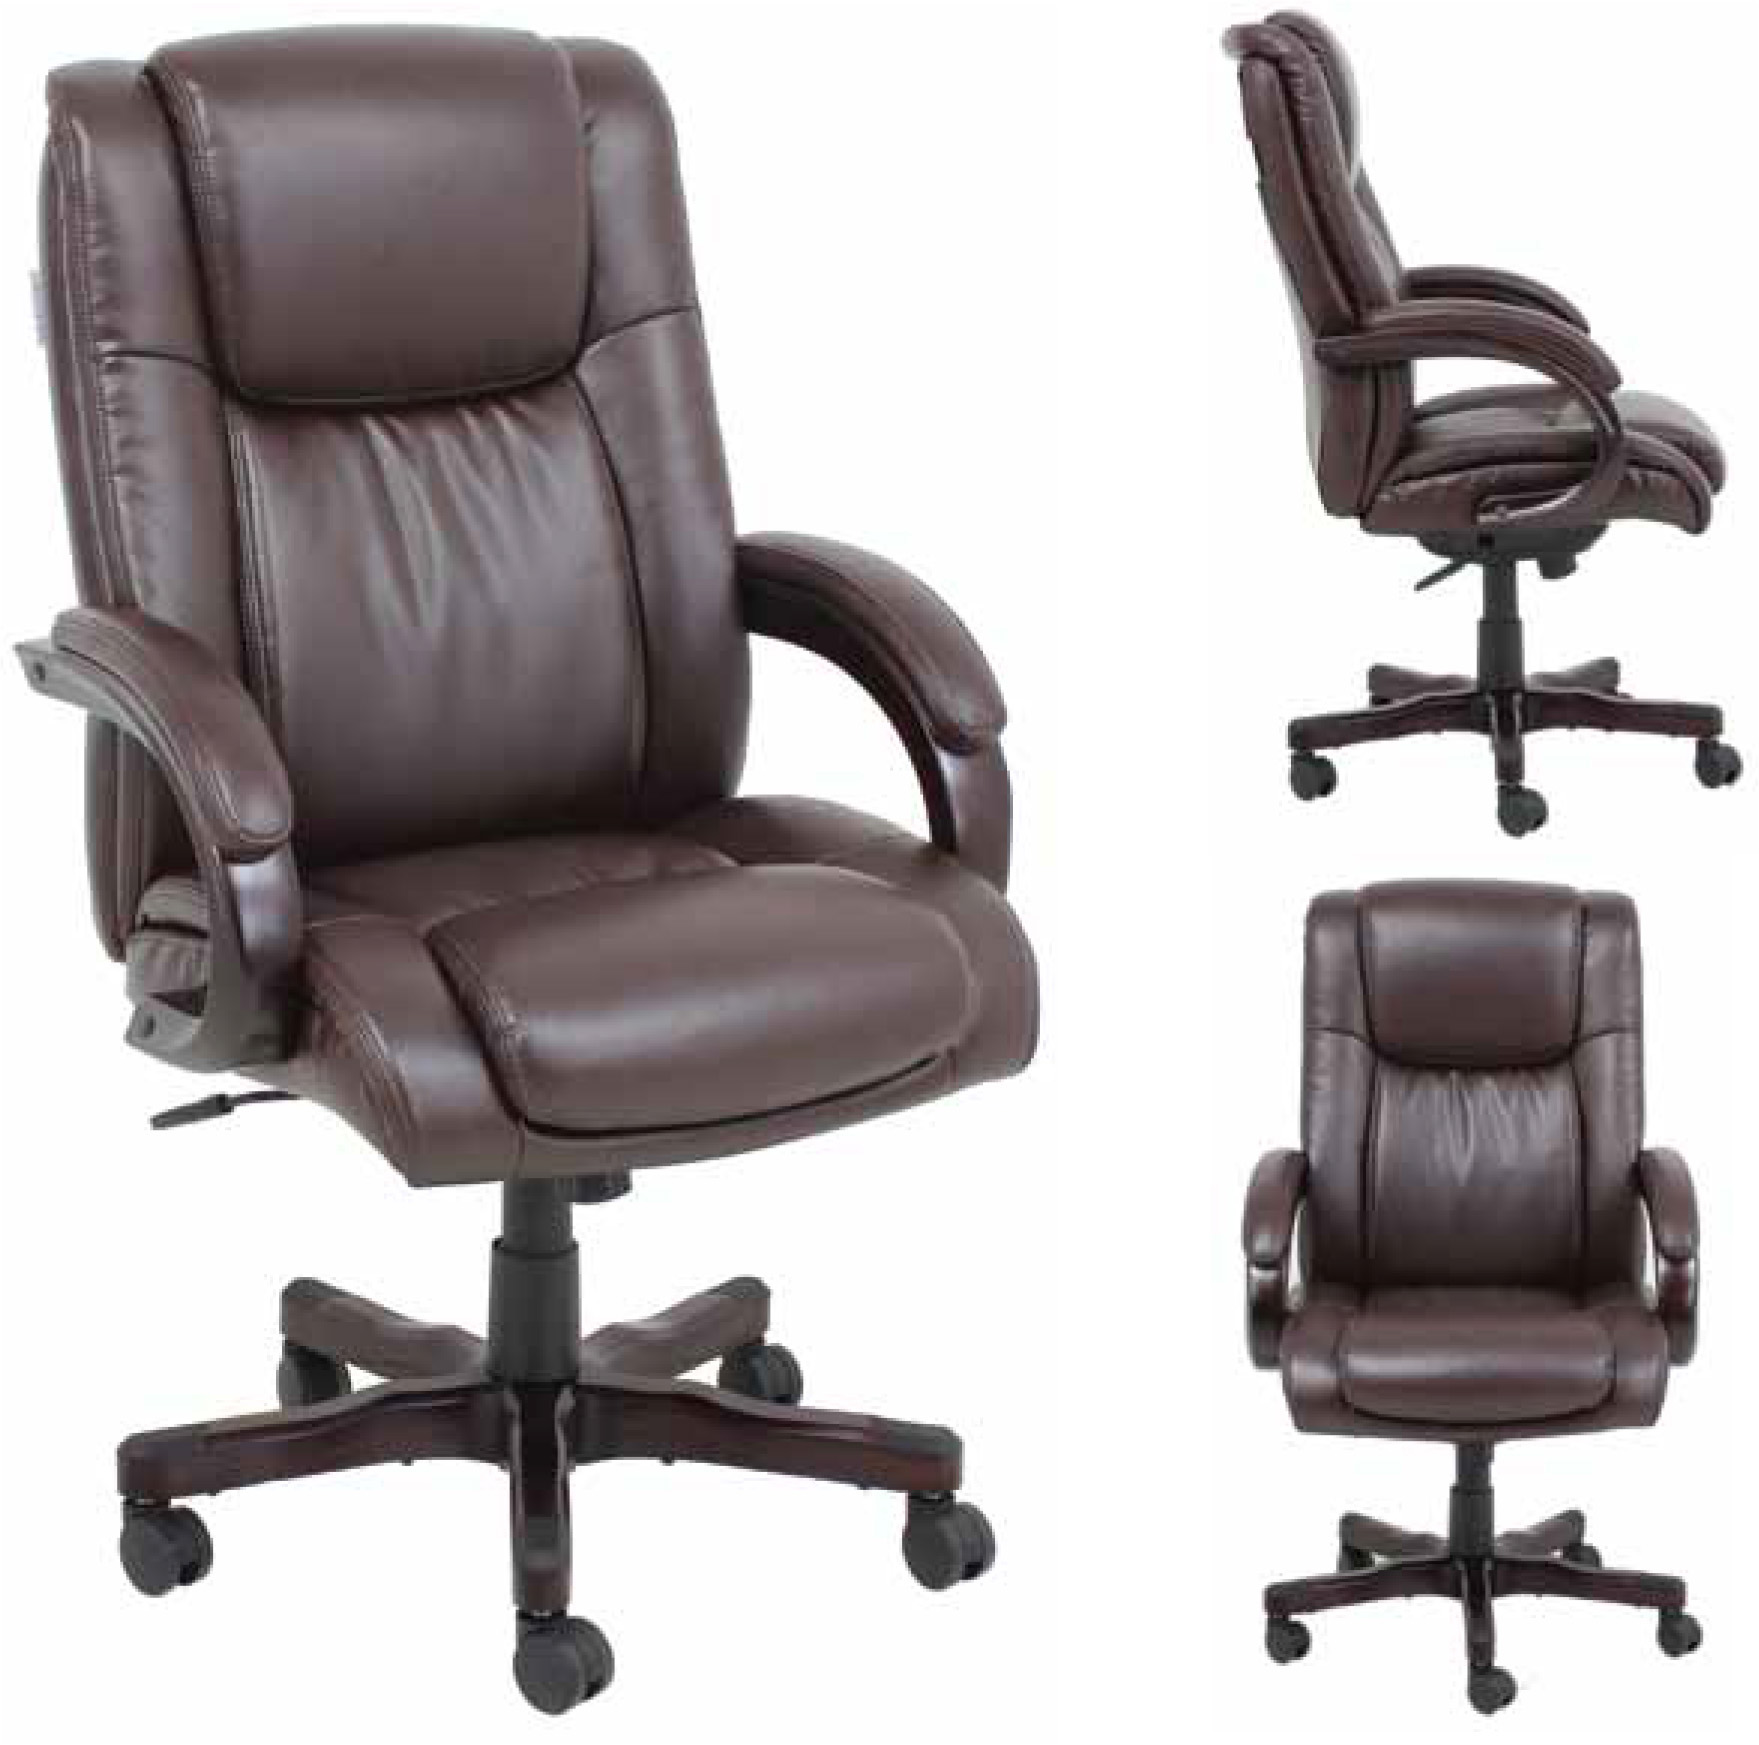 Barcalounger Titan Ii Home Office Desk Chair Recliner Leather Recliner Chair Furniture Lounge Chair Recliners